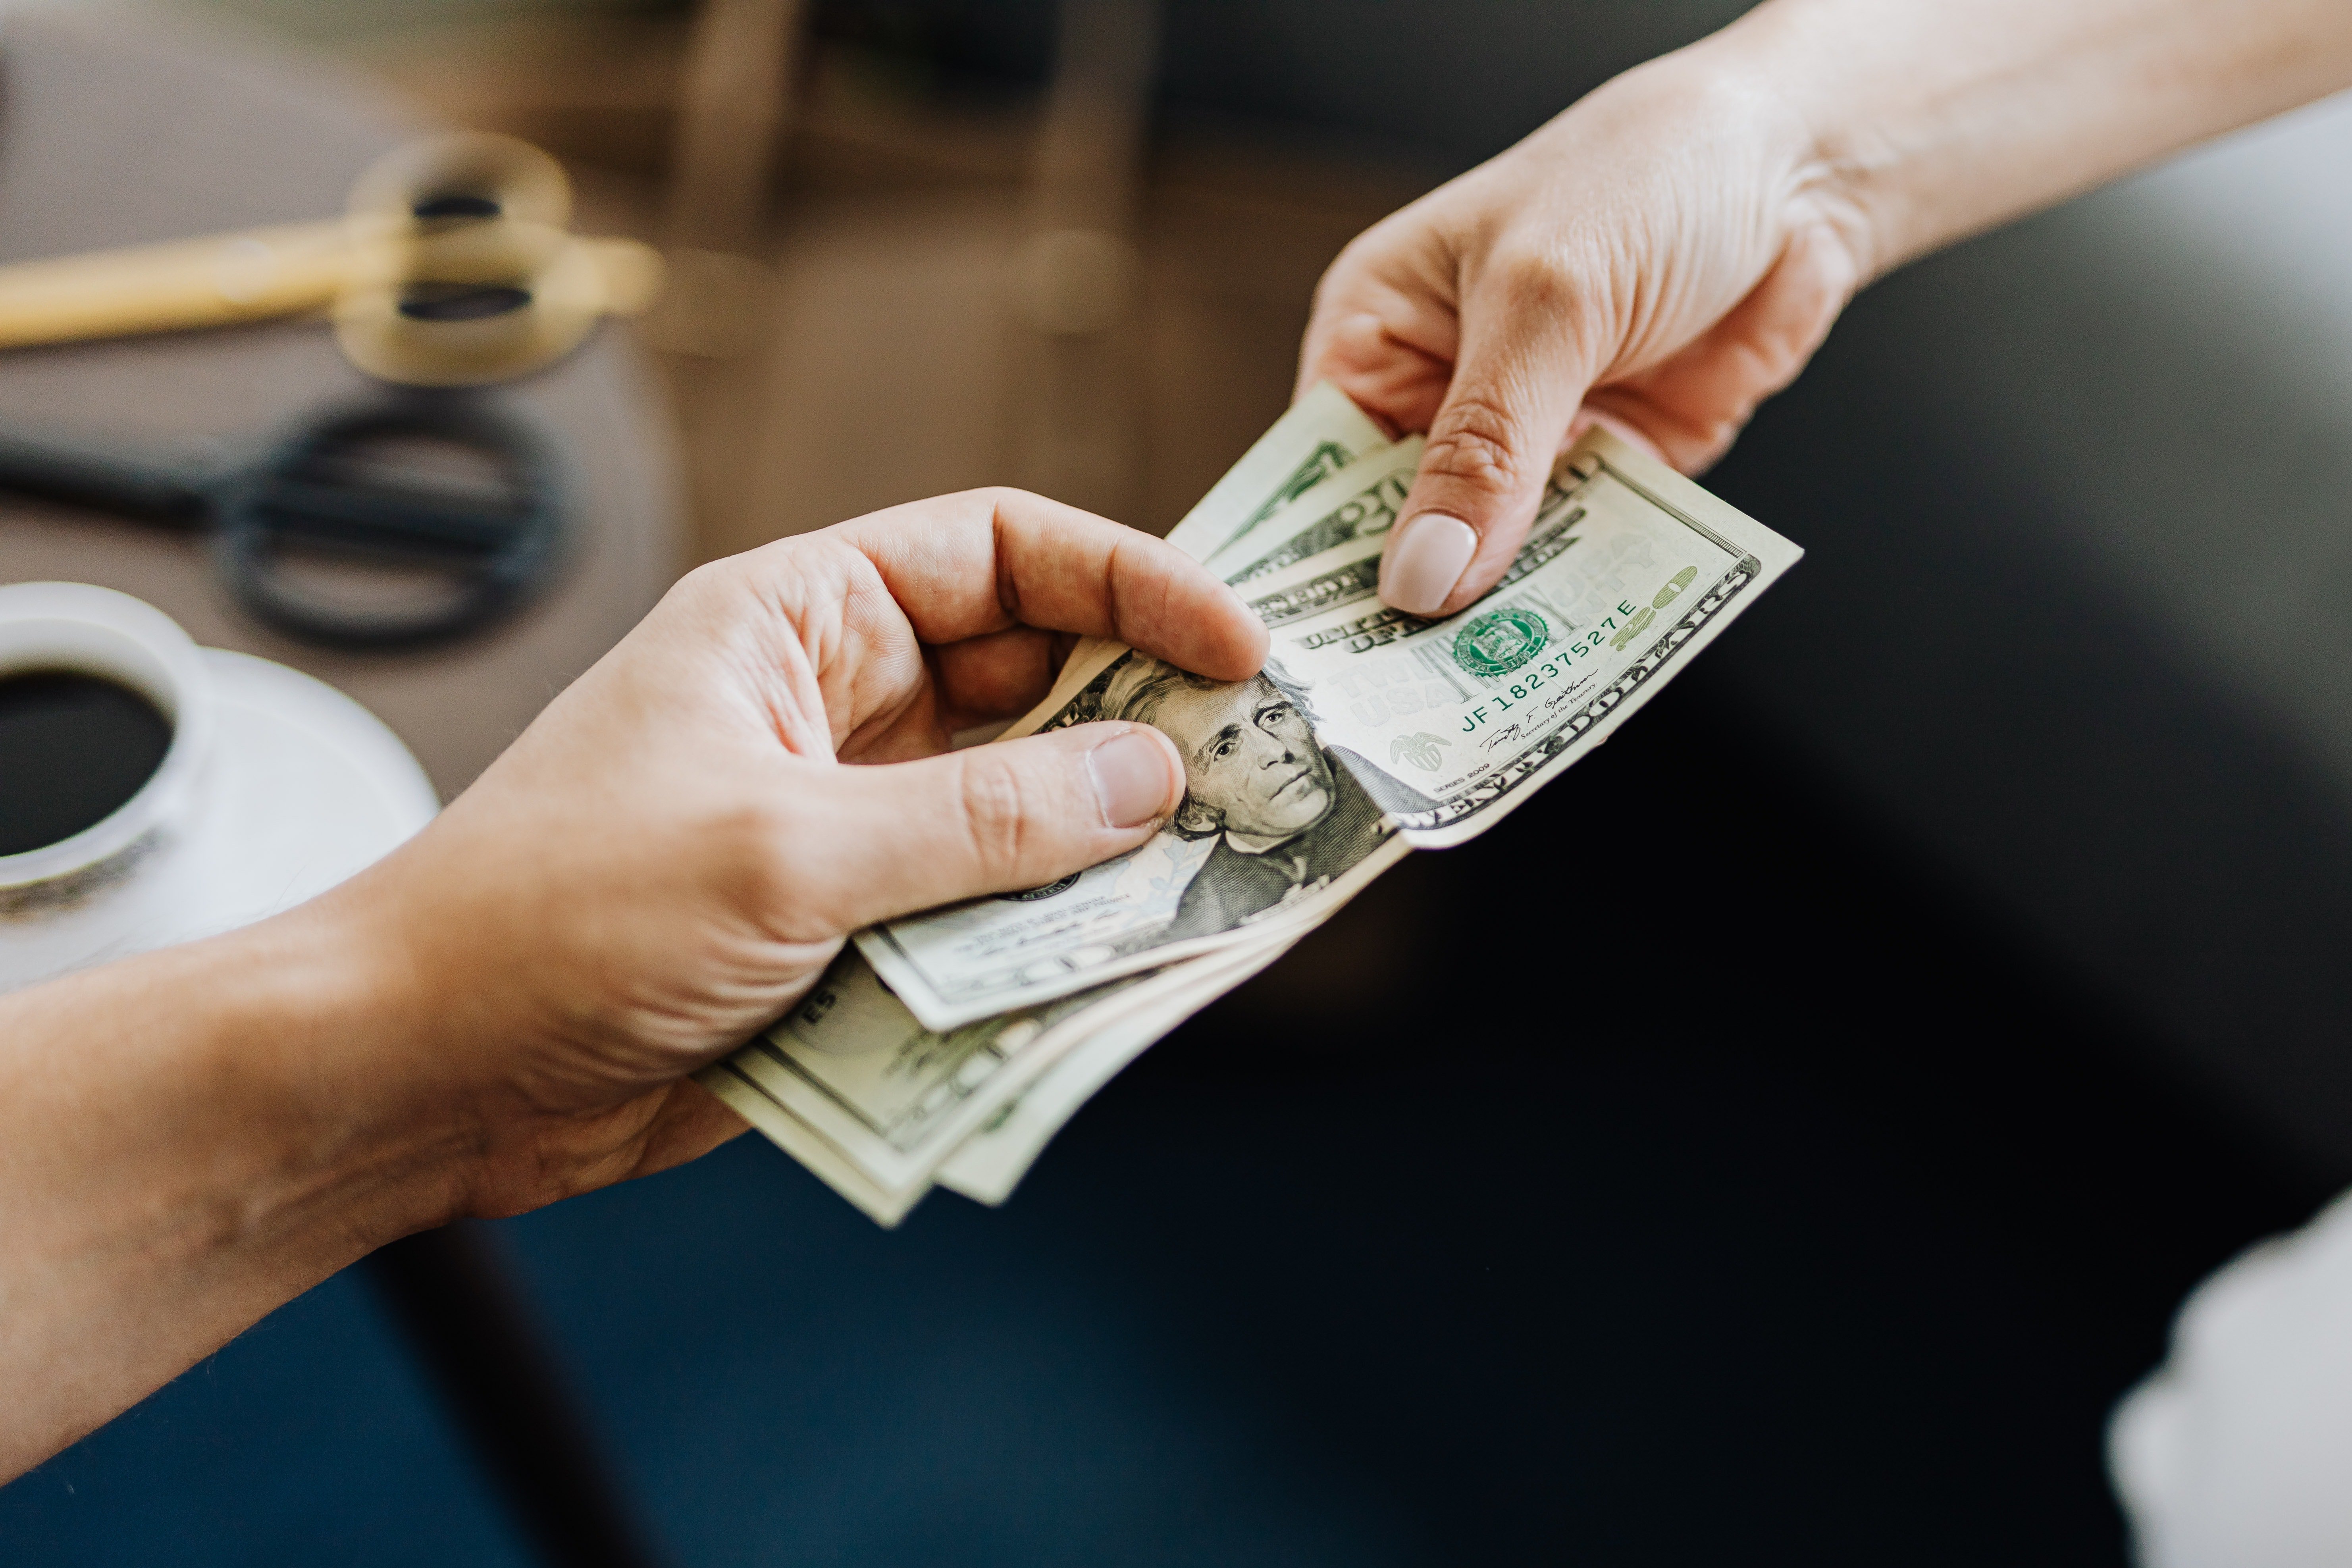 A person pays with cash. | Source: Pexels